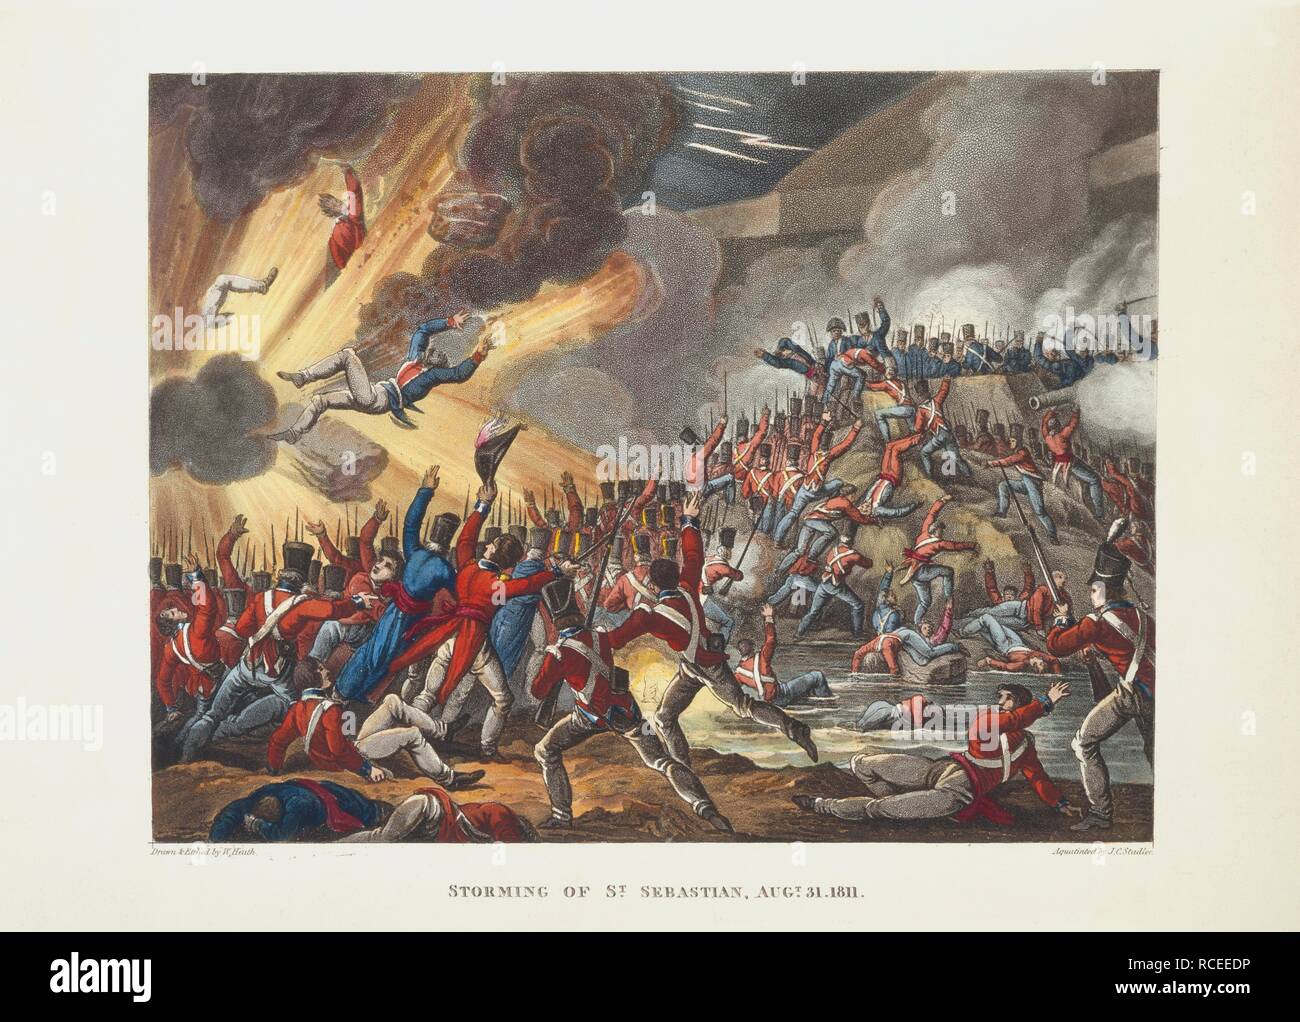 Storming of St. Sebastian, August 31st 1811. The wars of Wellington, a narrative poem. London, 1819. Source: 838.m.7, opposite page 160. Language: English. Author: Syntax, Doctor. Stadler, Joseph C. HEATH W. Stock Photo